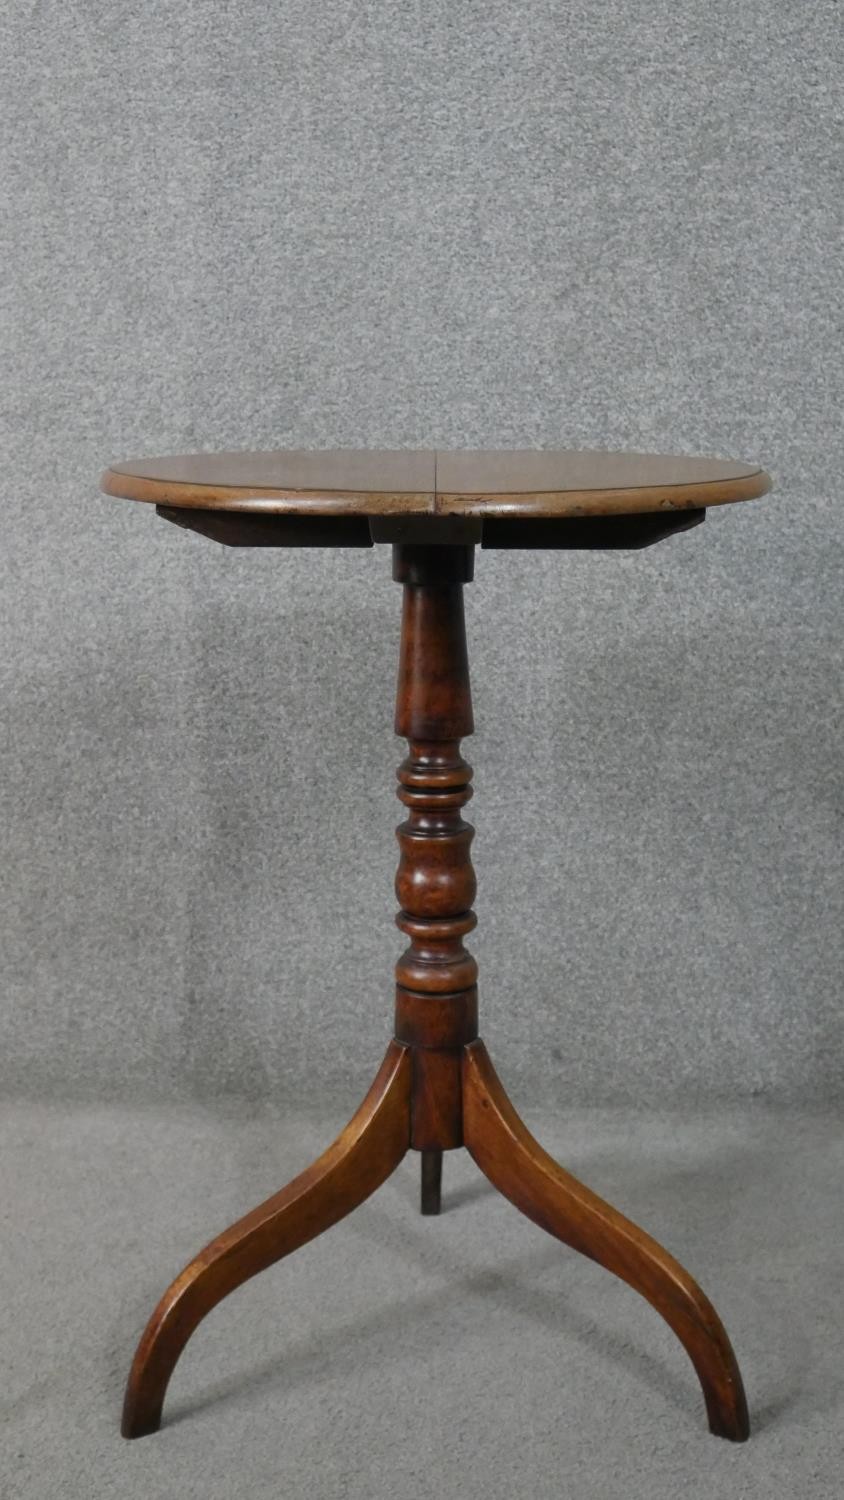 Lamp table, 19th century mahogany with tilt top action on tripod supports. H.70 W.49 D.57cm